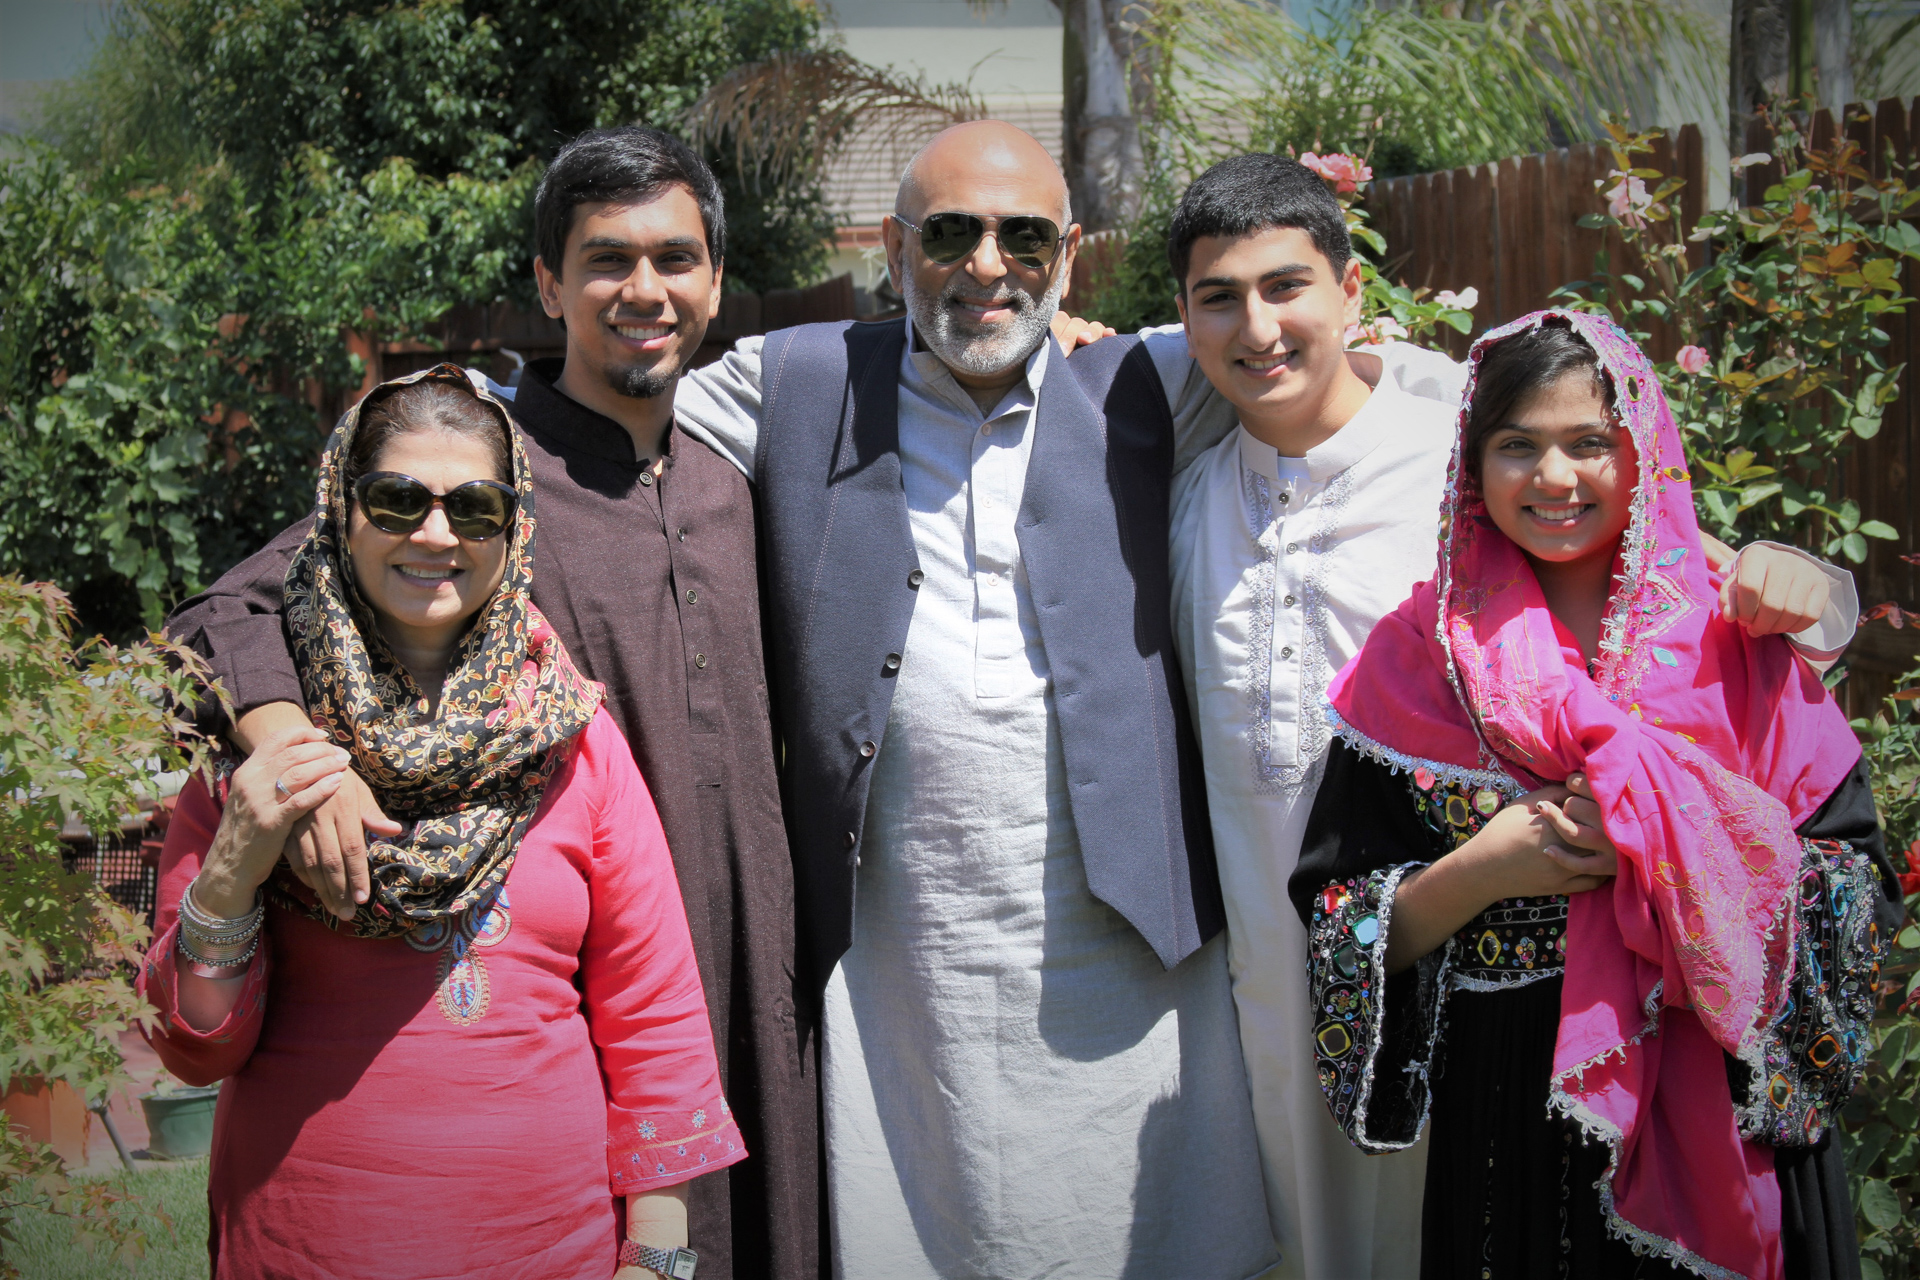 A family portrait of the Rehman family prior to Aaron's death.